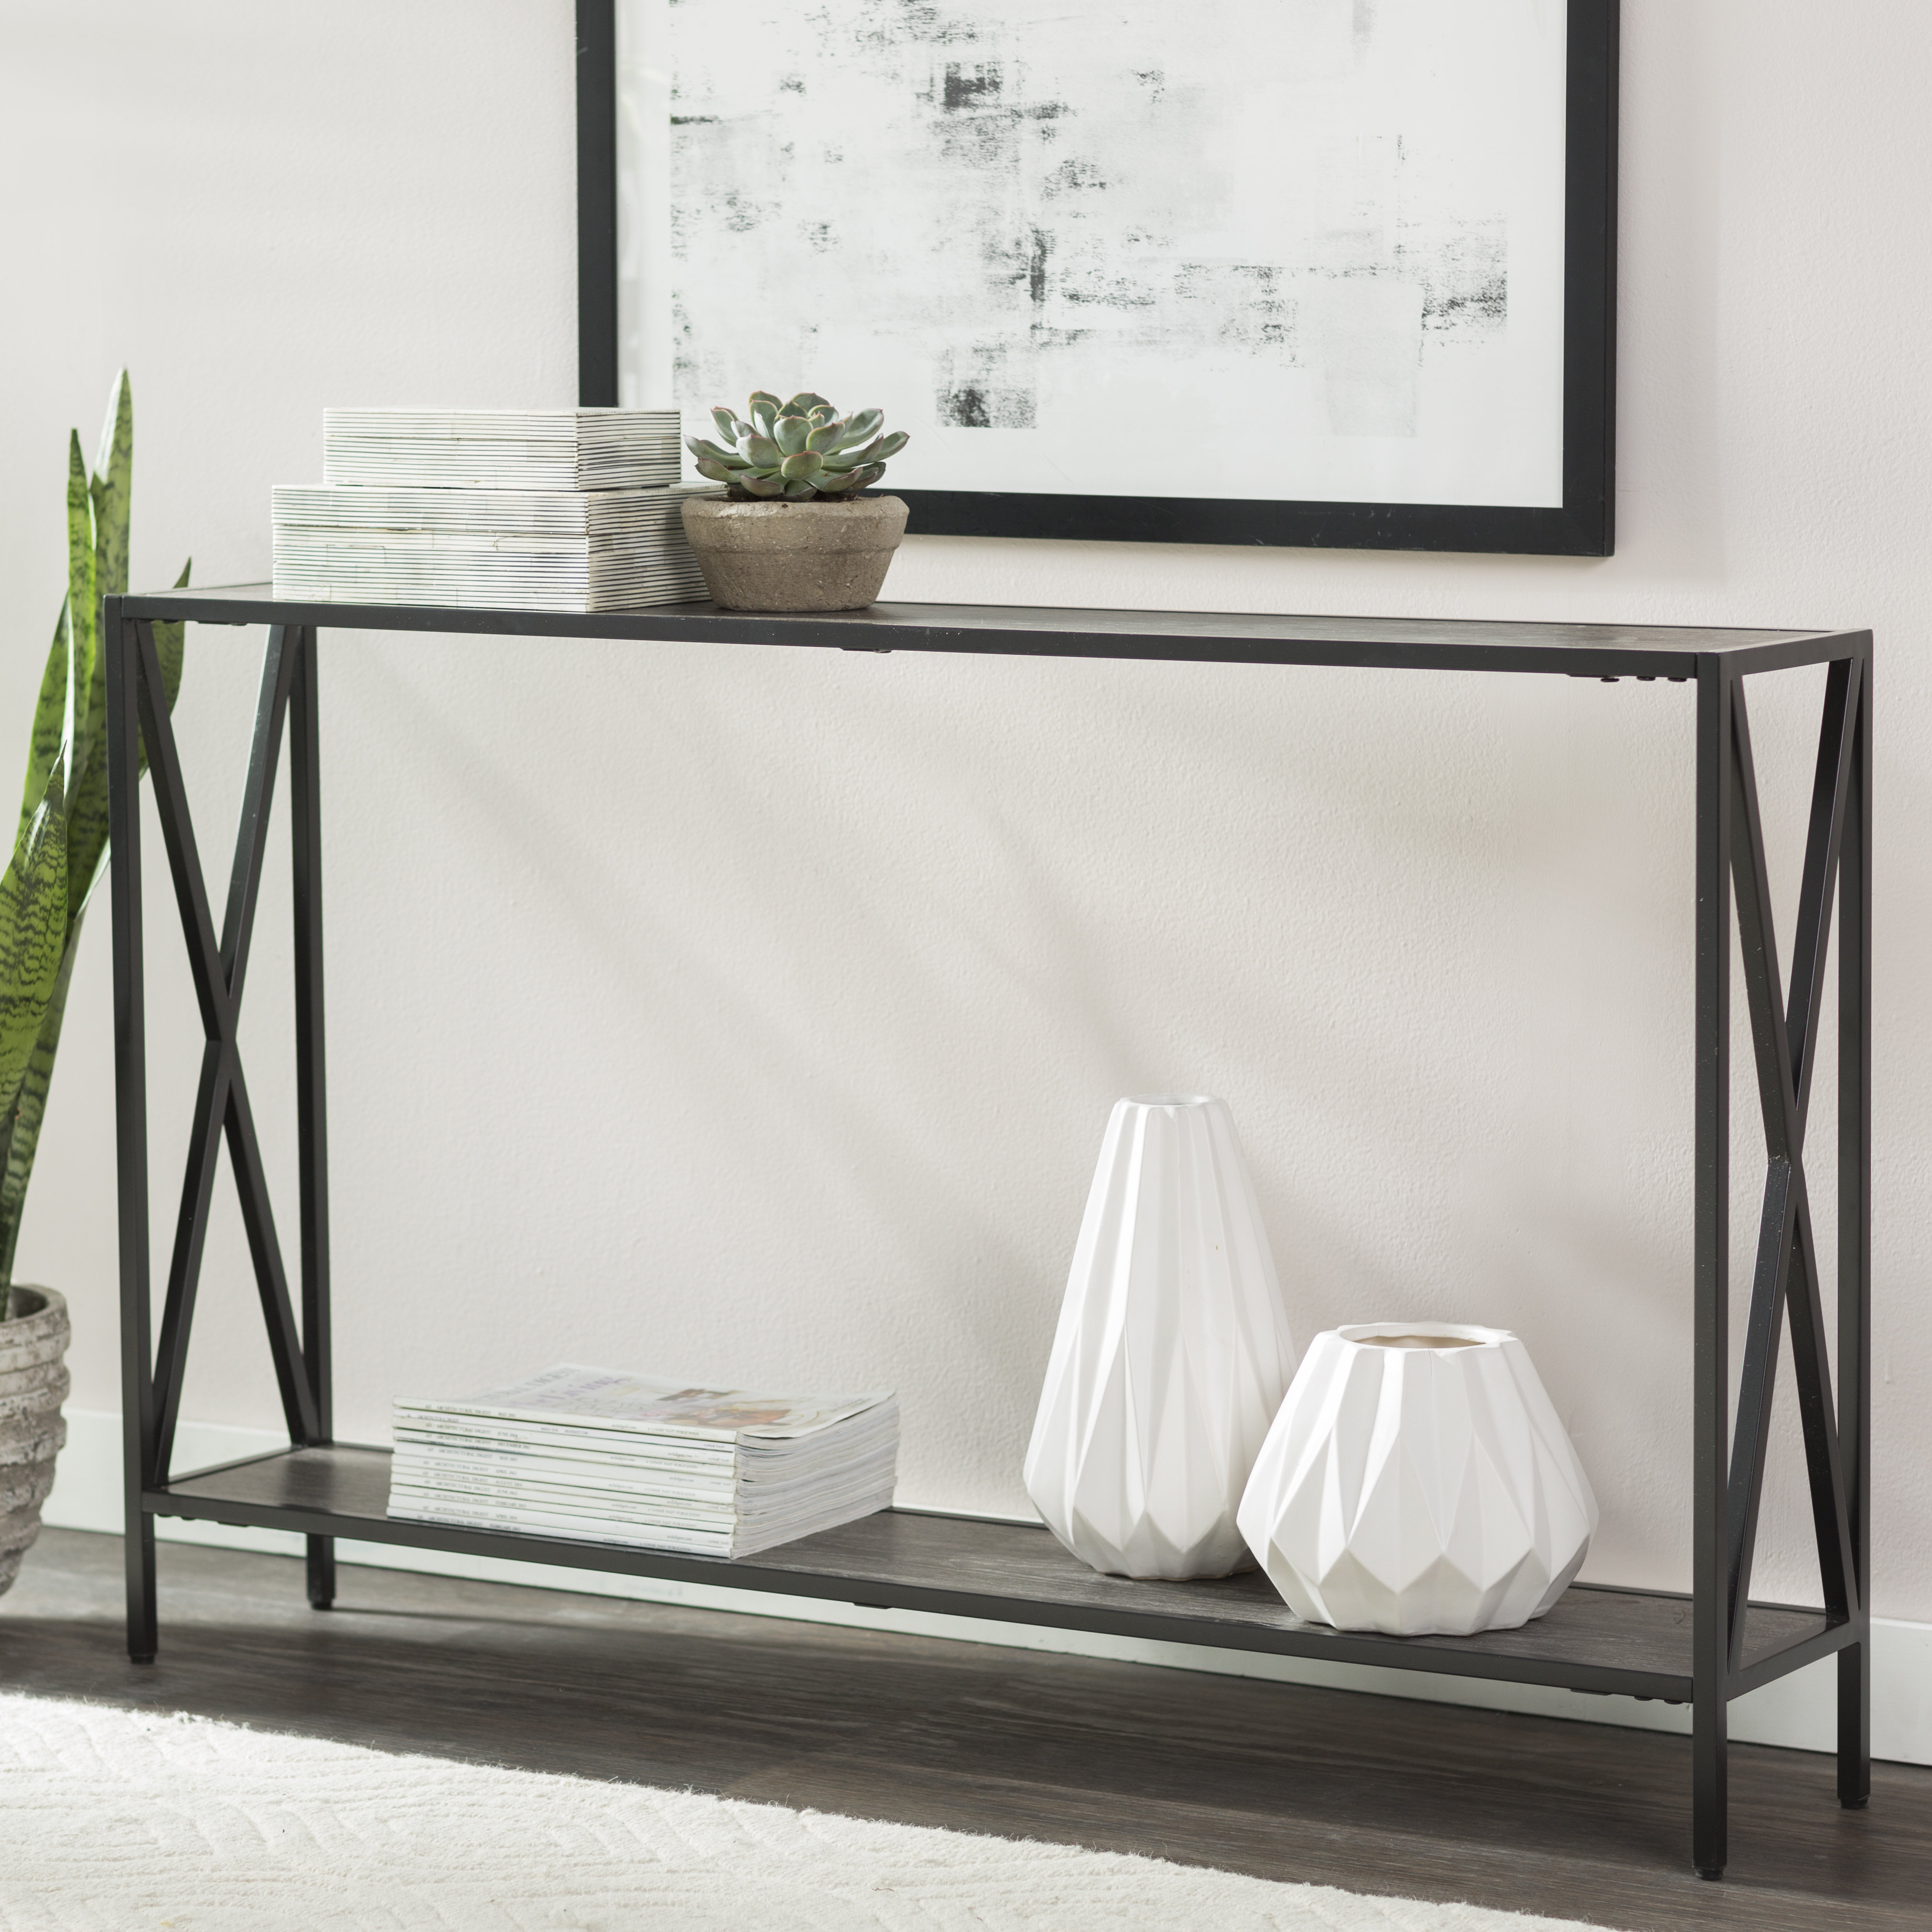 Featured image of post Black Entryway Table Decor : Make the entryway your home&#039;s red carpet!